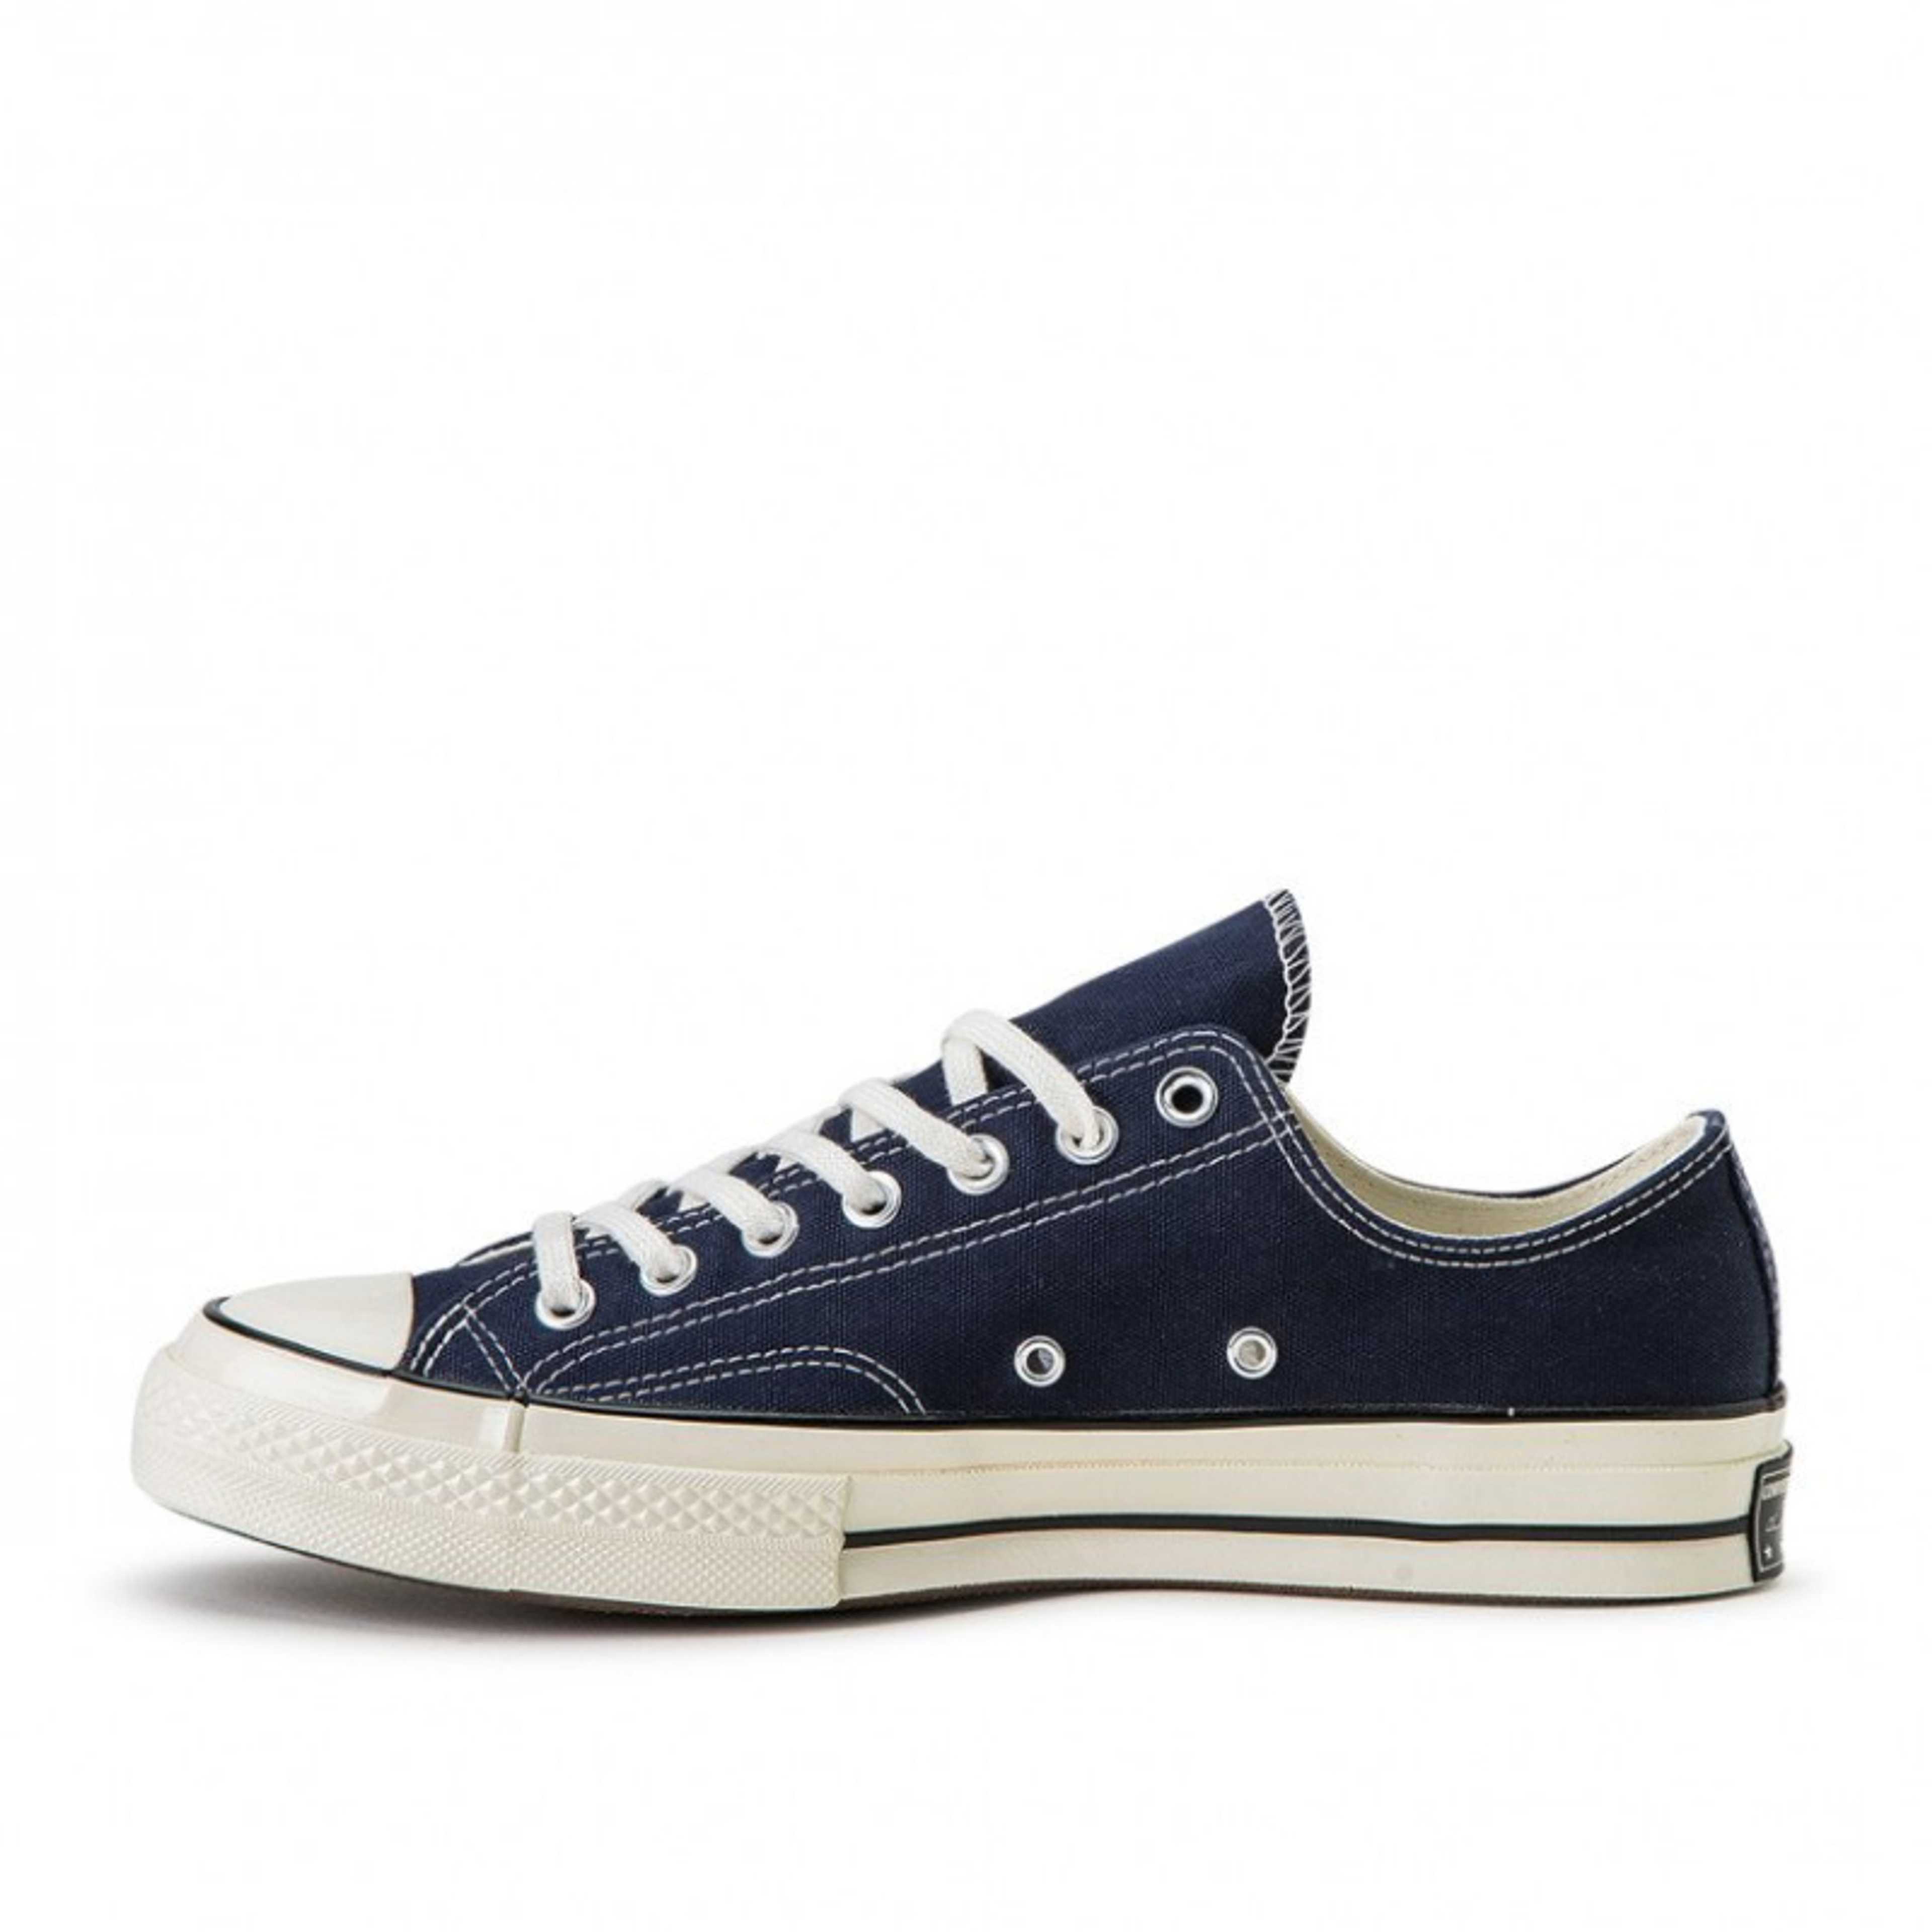 New Chuck 70 low-top sneakers-001